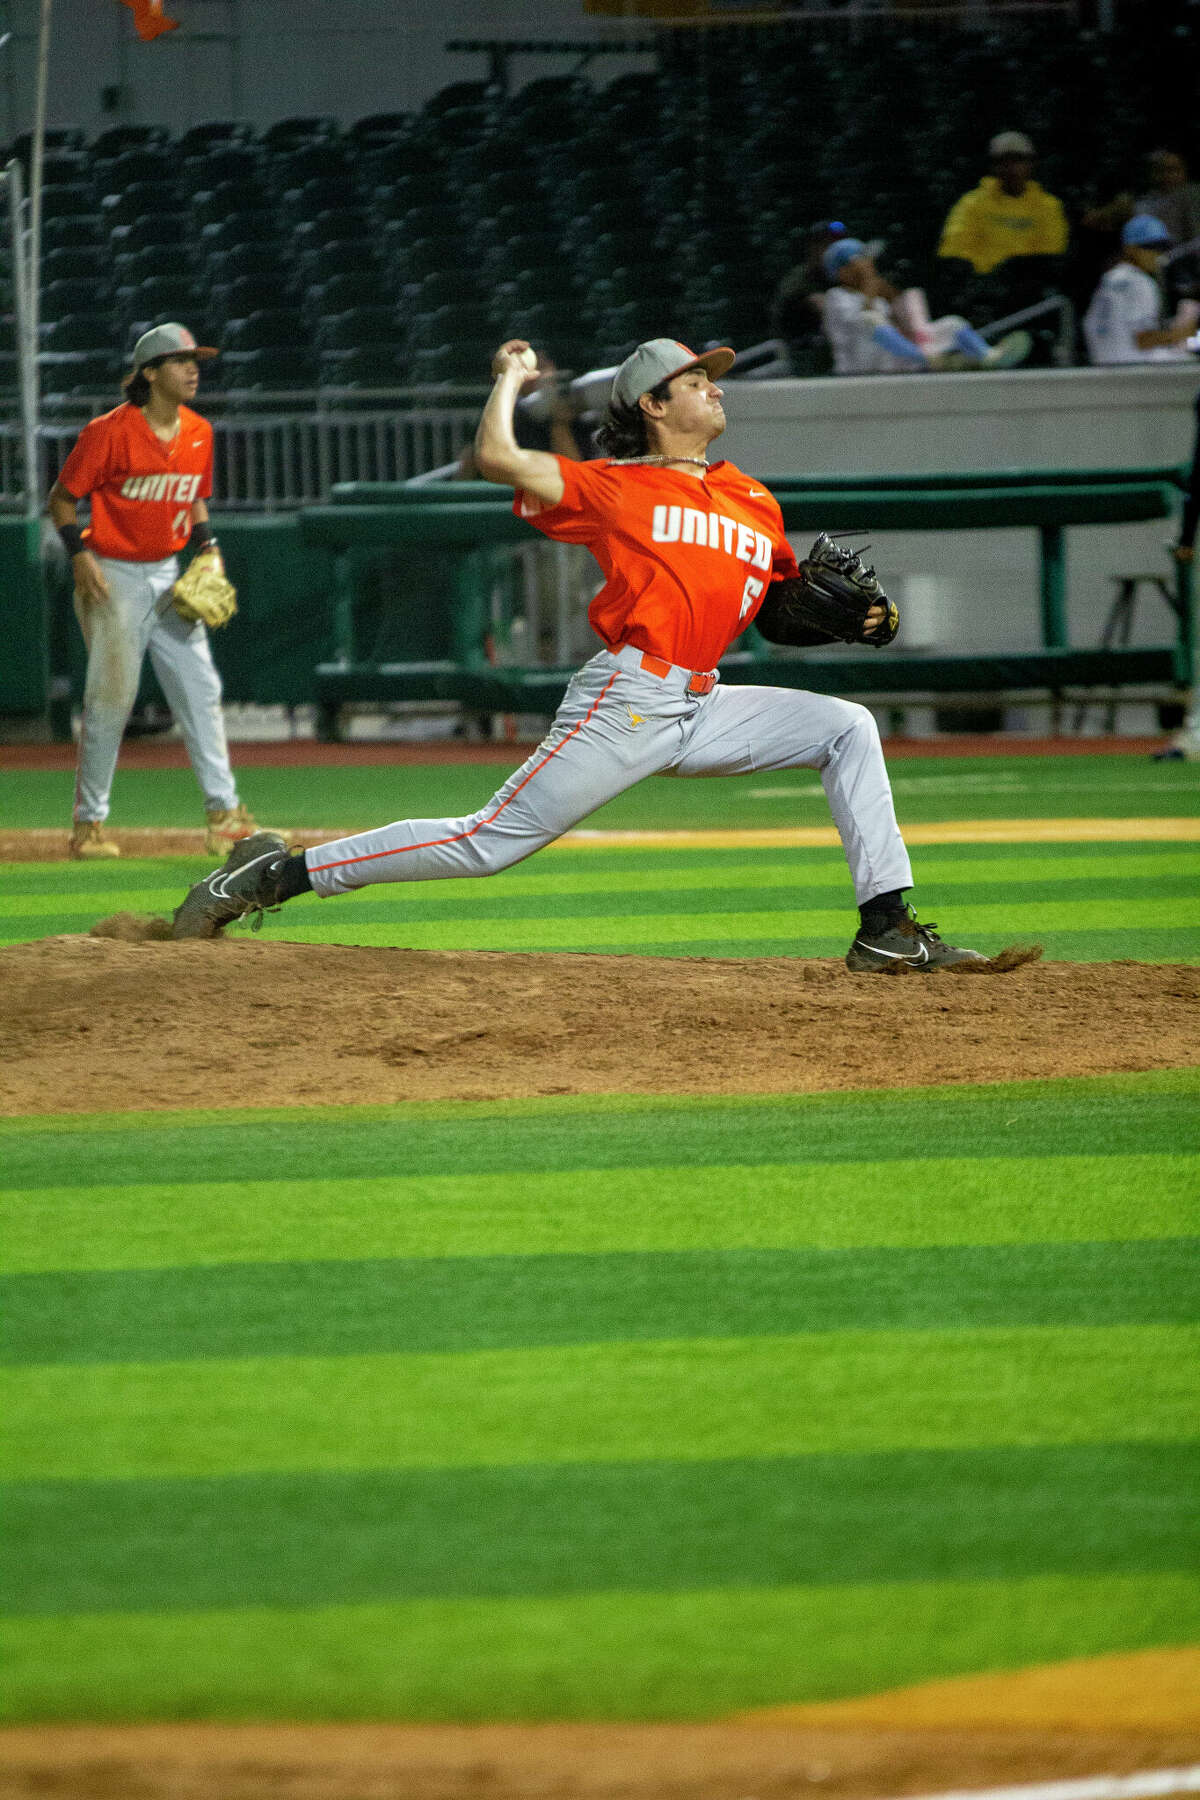 Daniel Rendon and the United Longhorns defeated the Alexander Bulldogs on Tuesday.